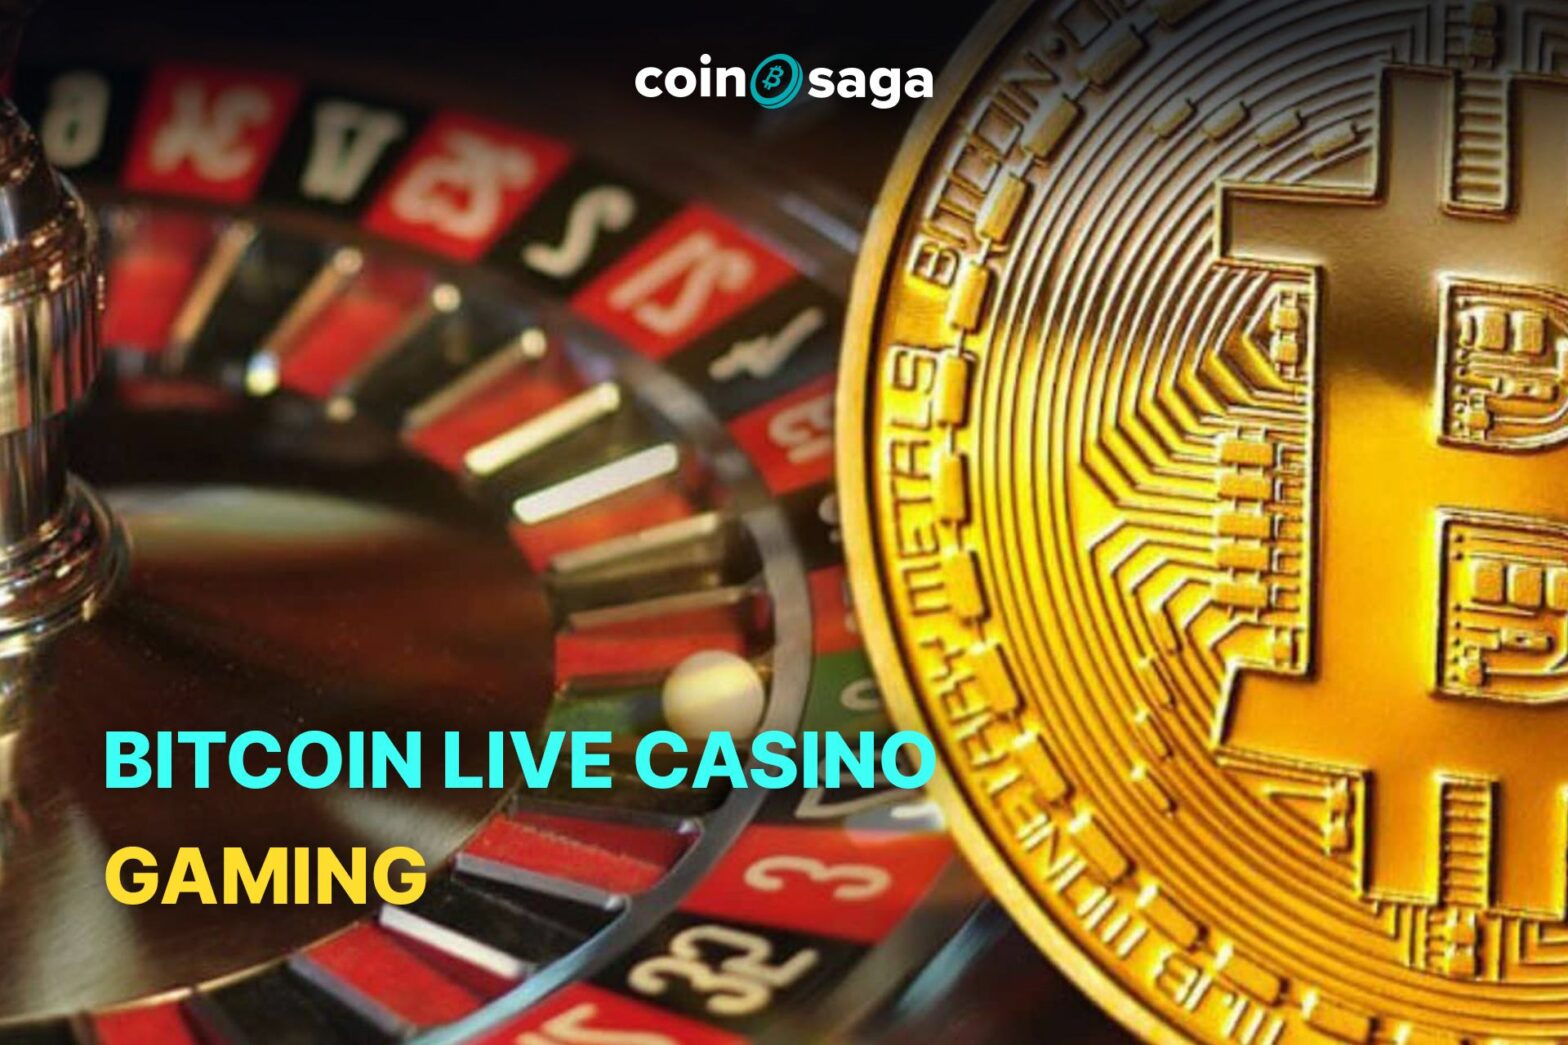 3 Kinds Of crypto currency casino: Which One Will Make The Most Money?